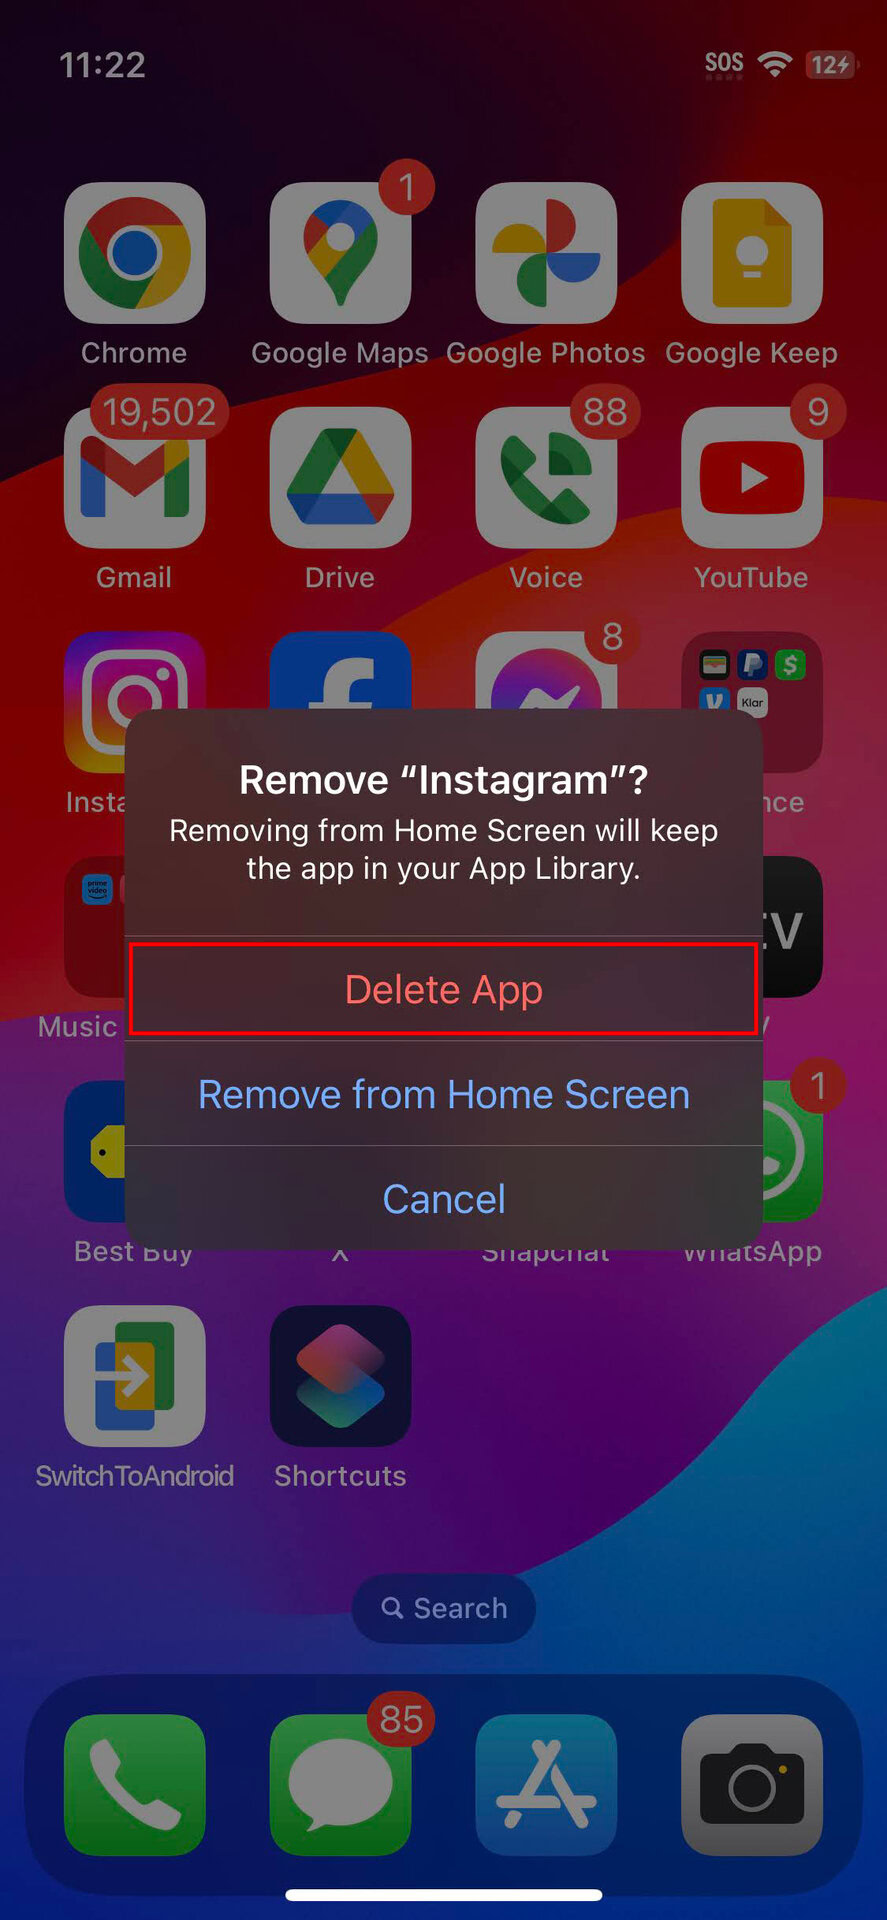 How to uninstall apps on iPhone (3)